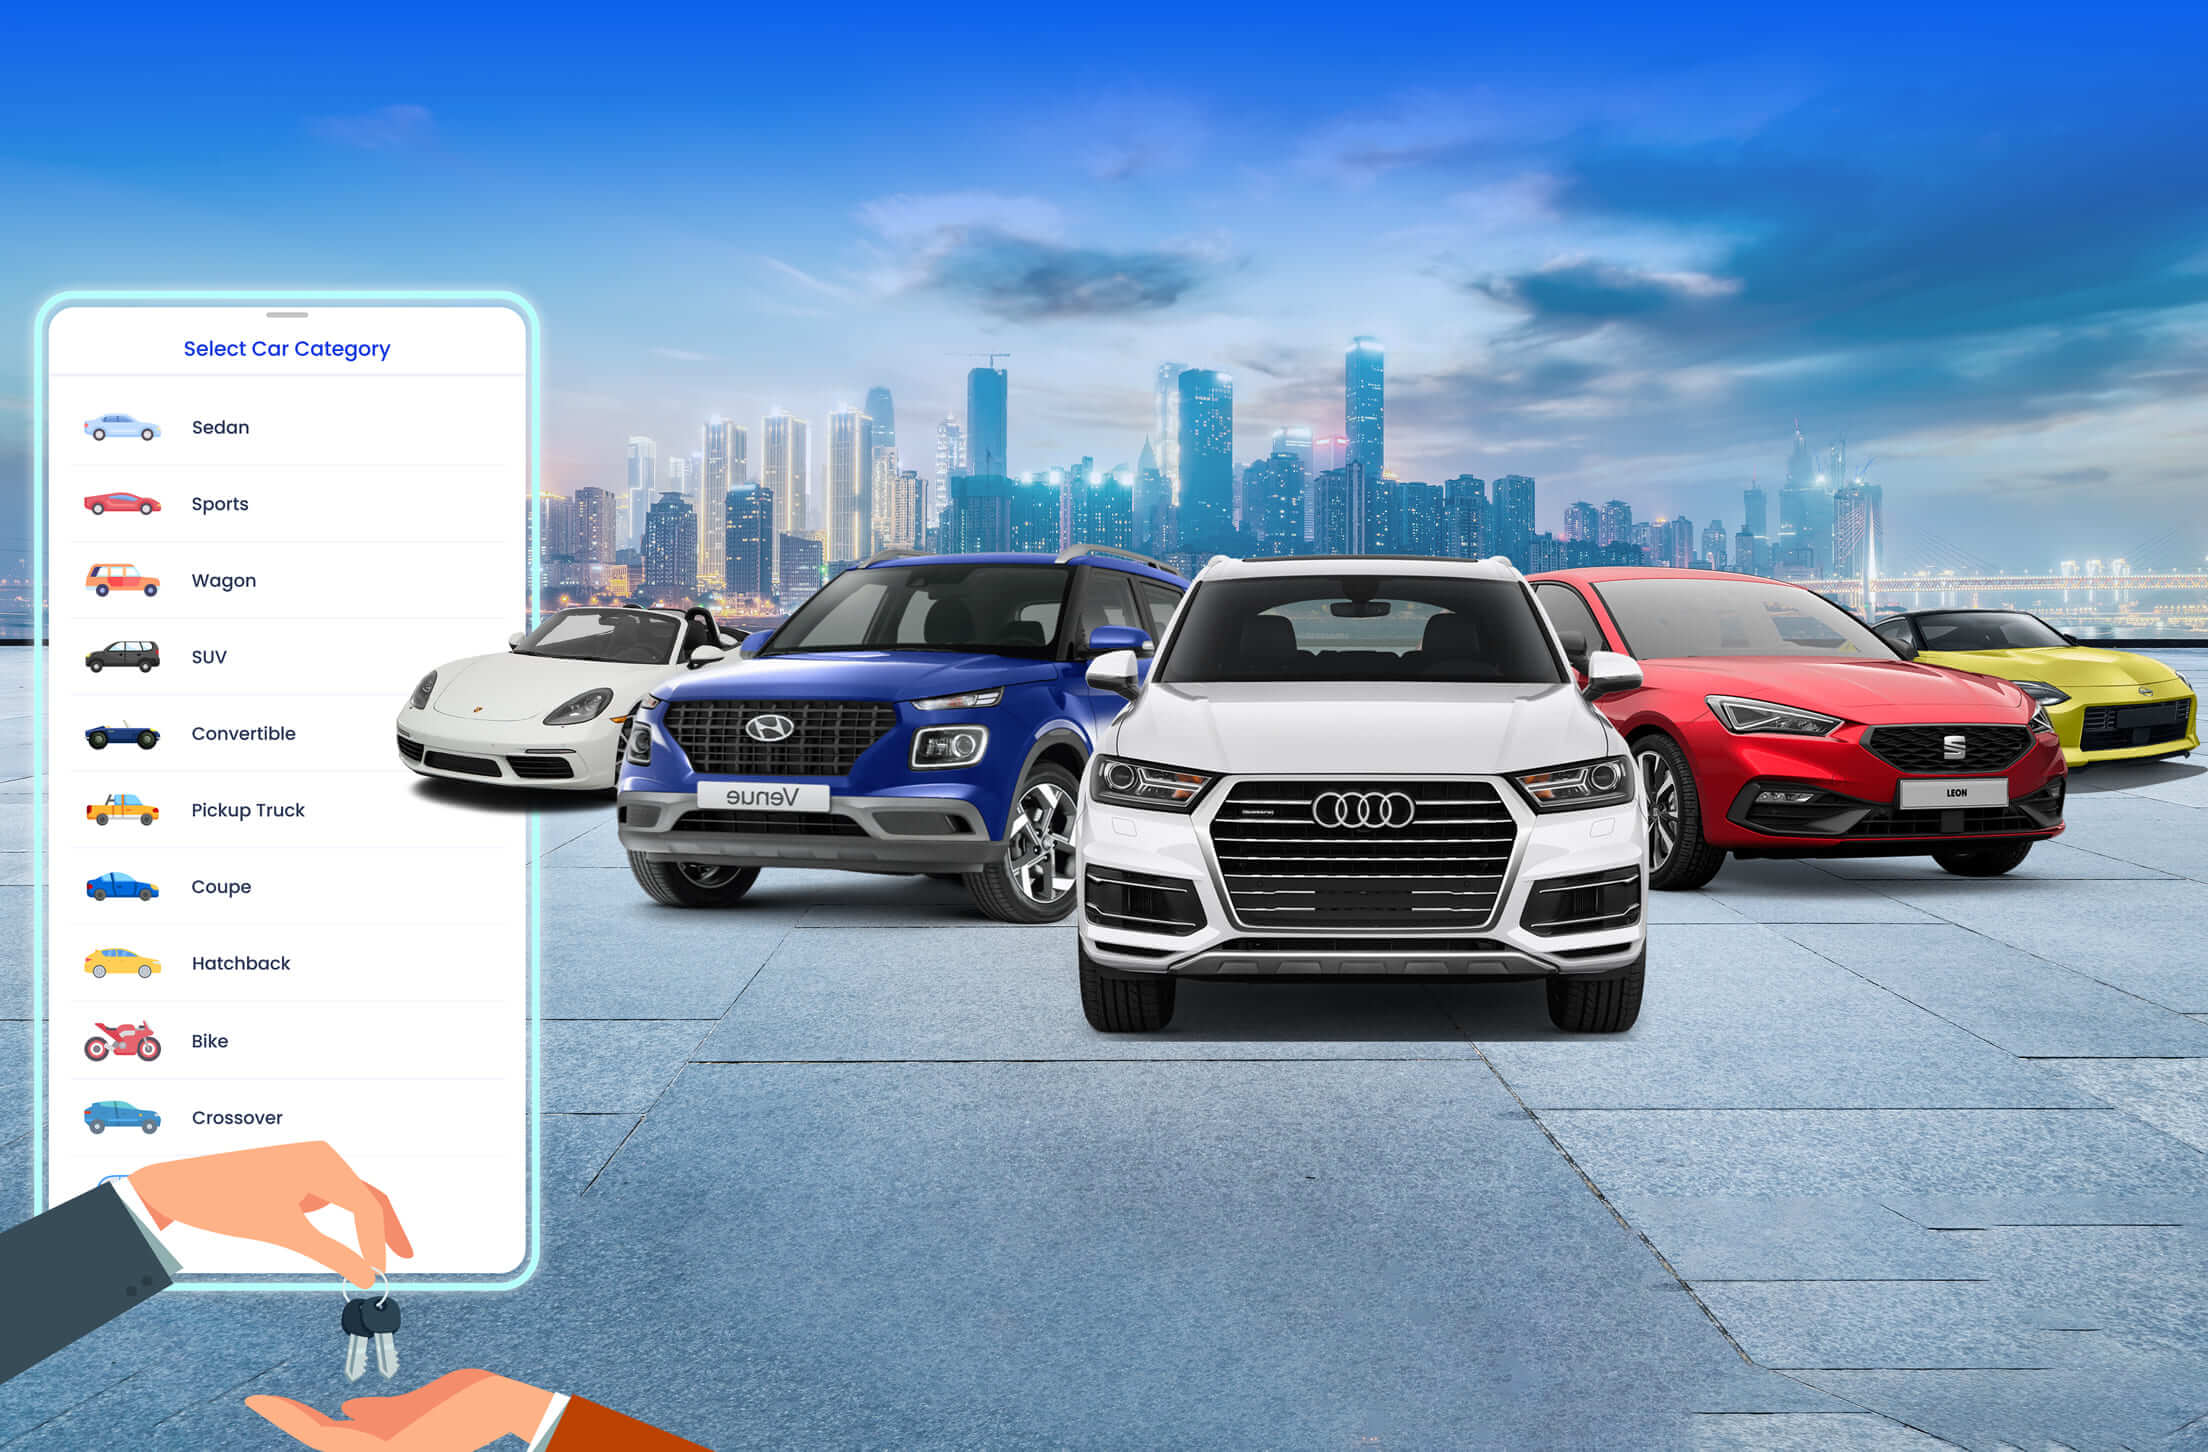 Rent Any Model from Beeda Car Rental Service